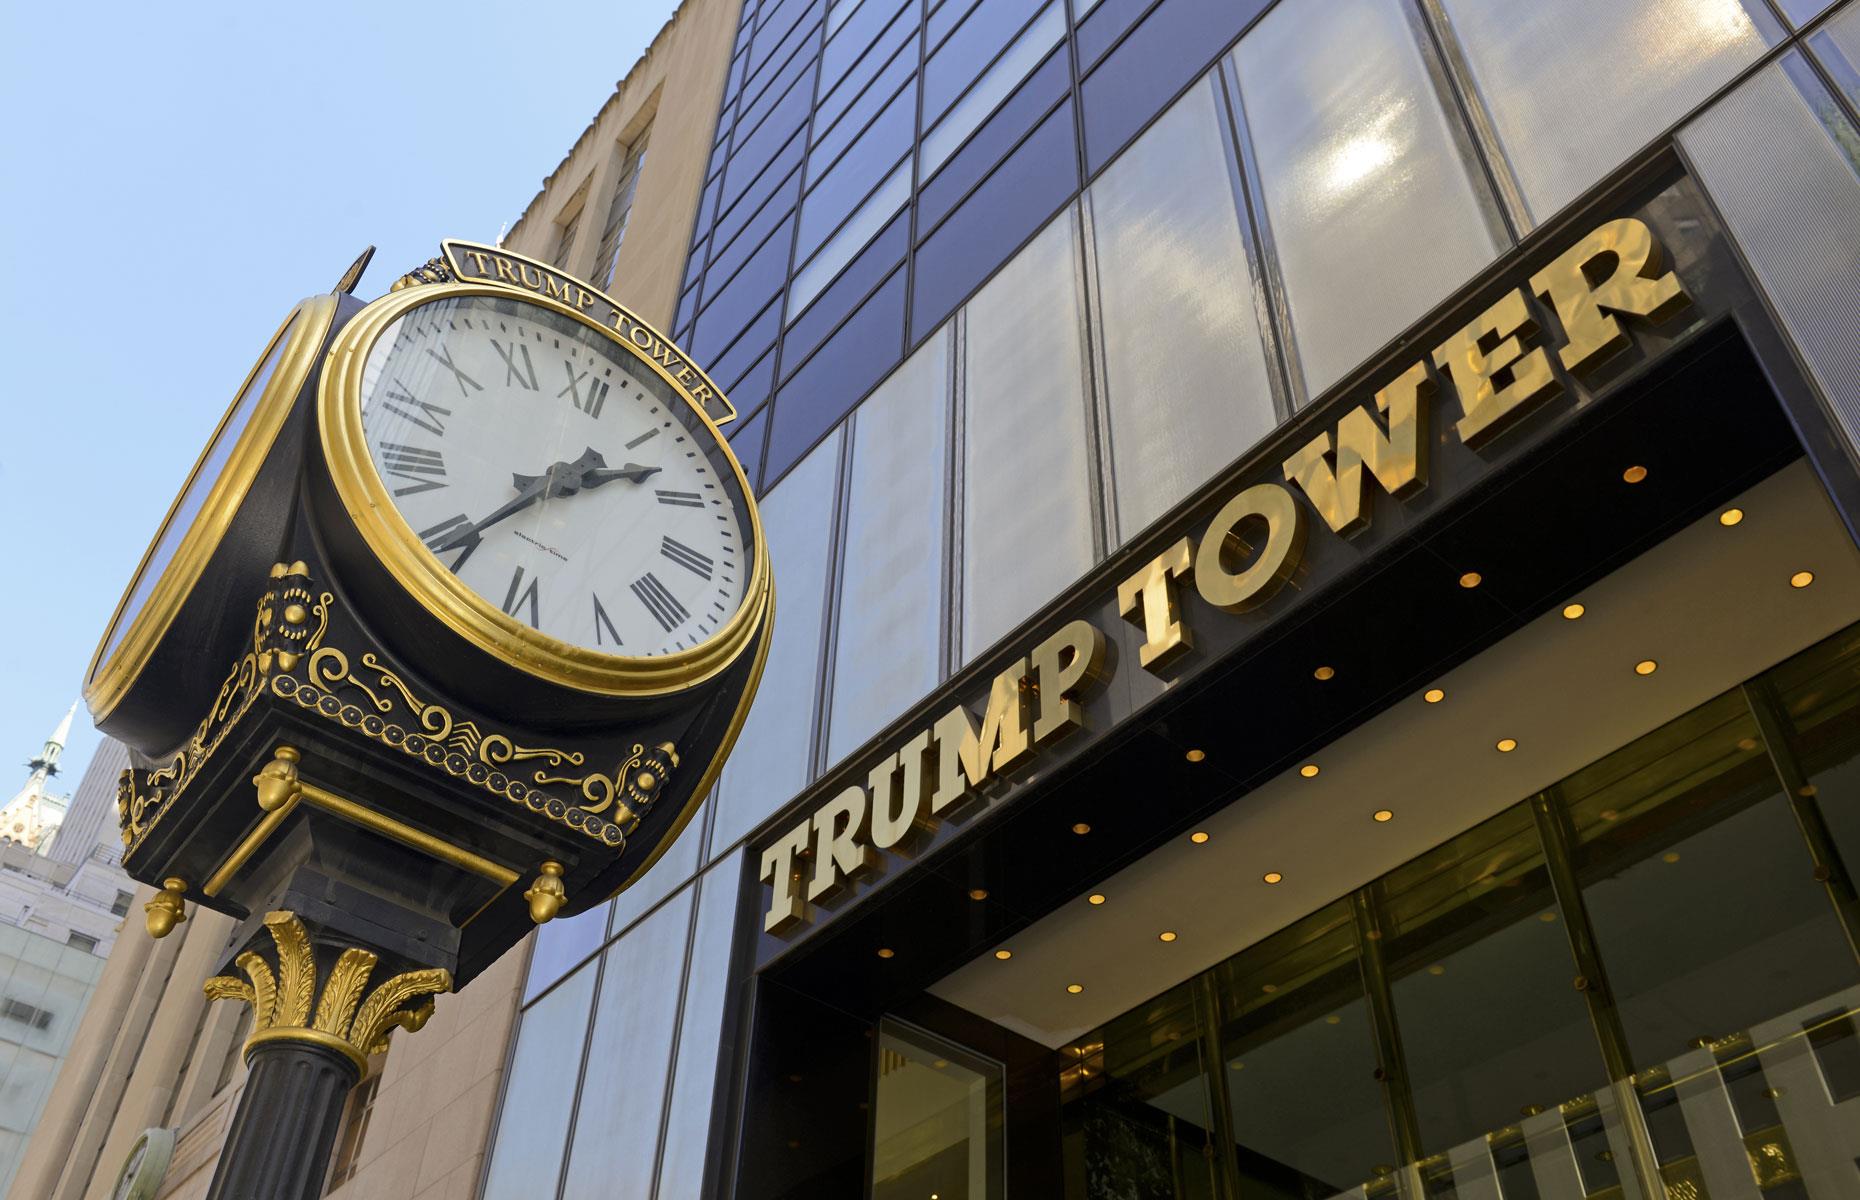 Trump Tower security costs: $50 million